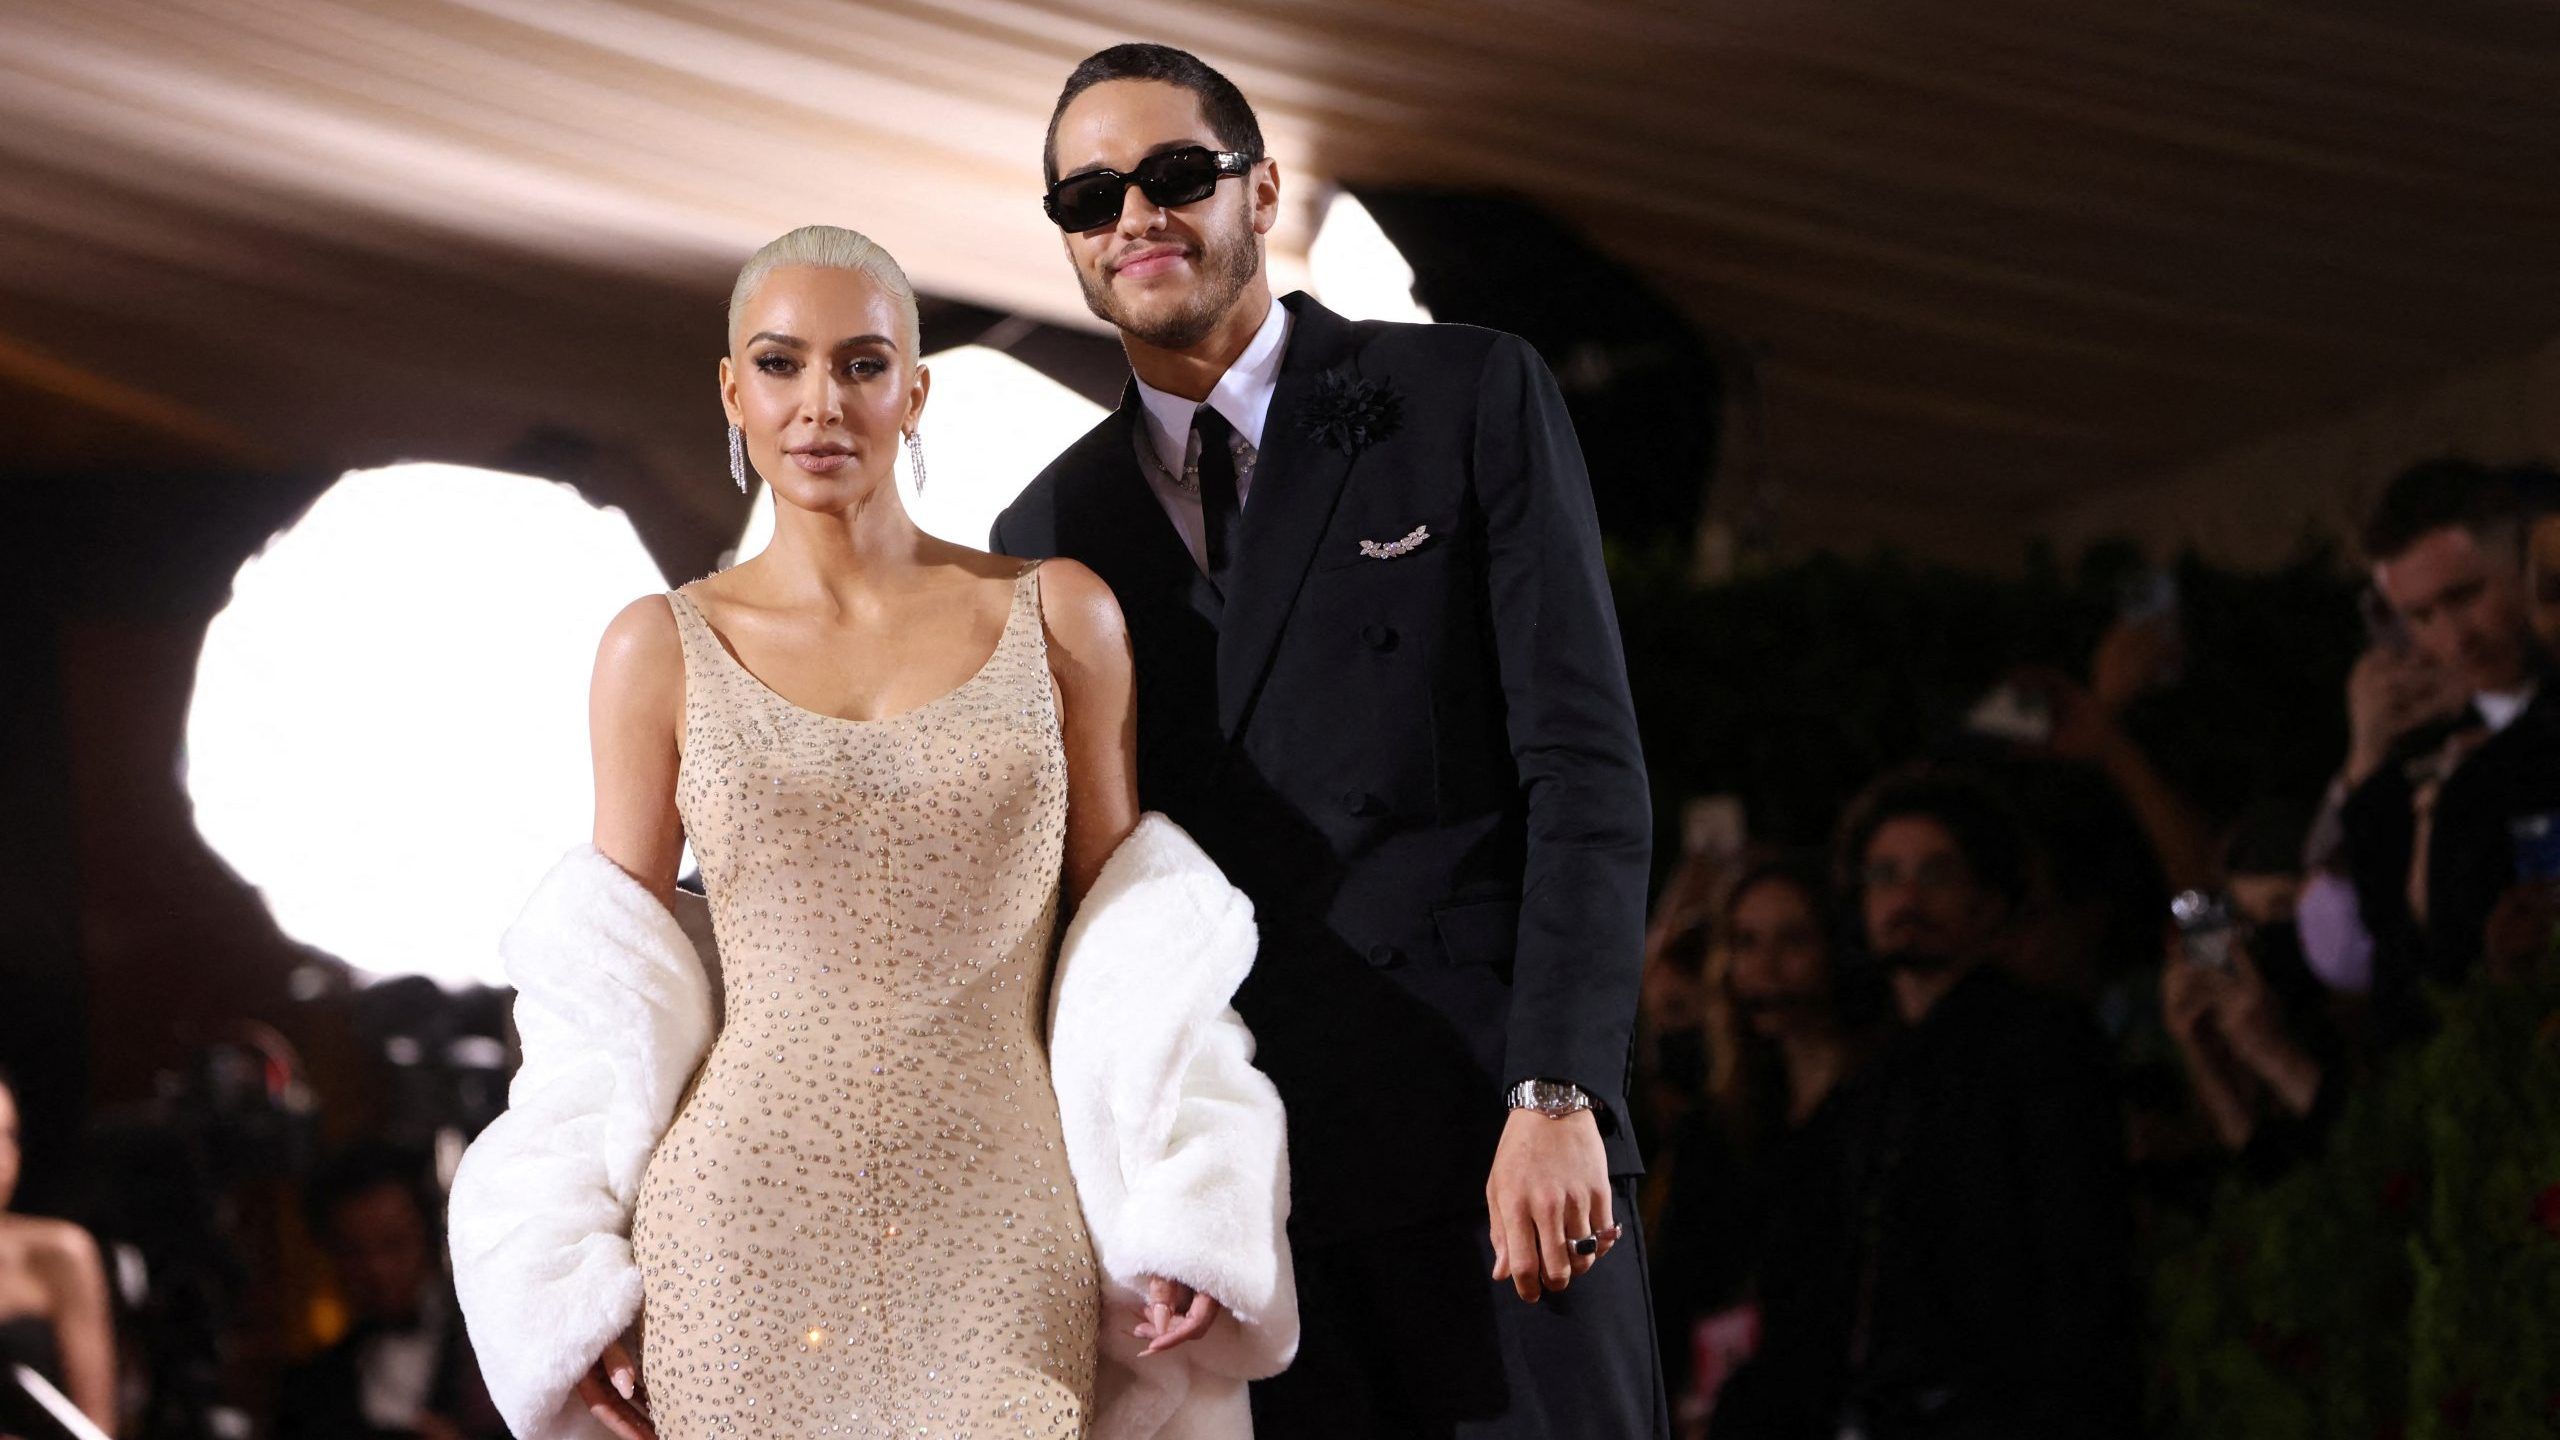 Kim Kardashian and Pete Davidson arrive at the In America: An Anthology of Fashion themed Met Gala at the Metropolitan Museum of Art. REUTERS/Andrew Kelly     TPX IMAGES OF THE DAY